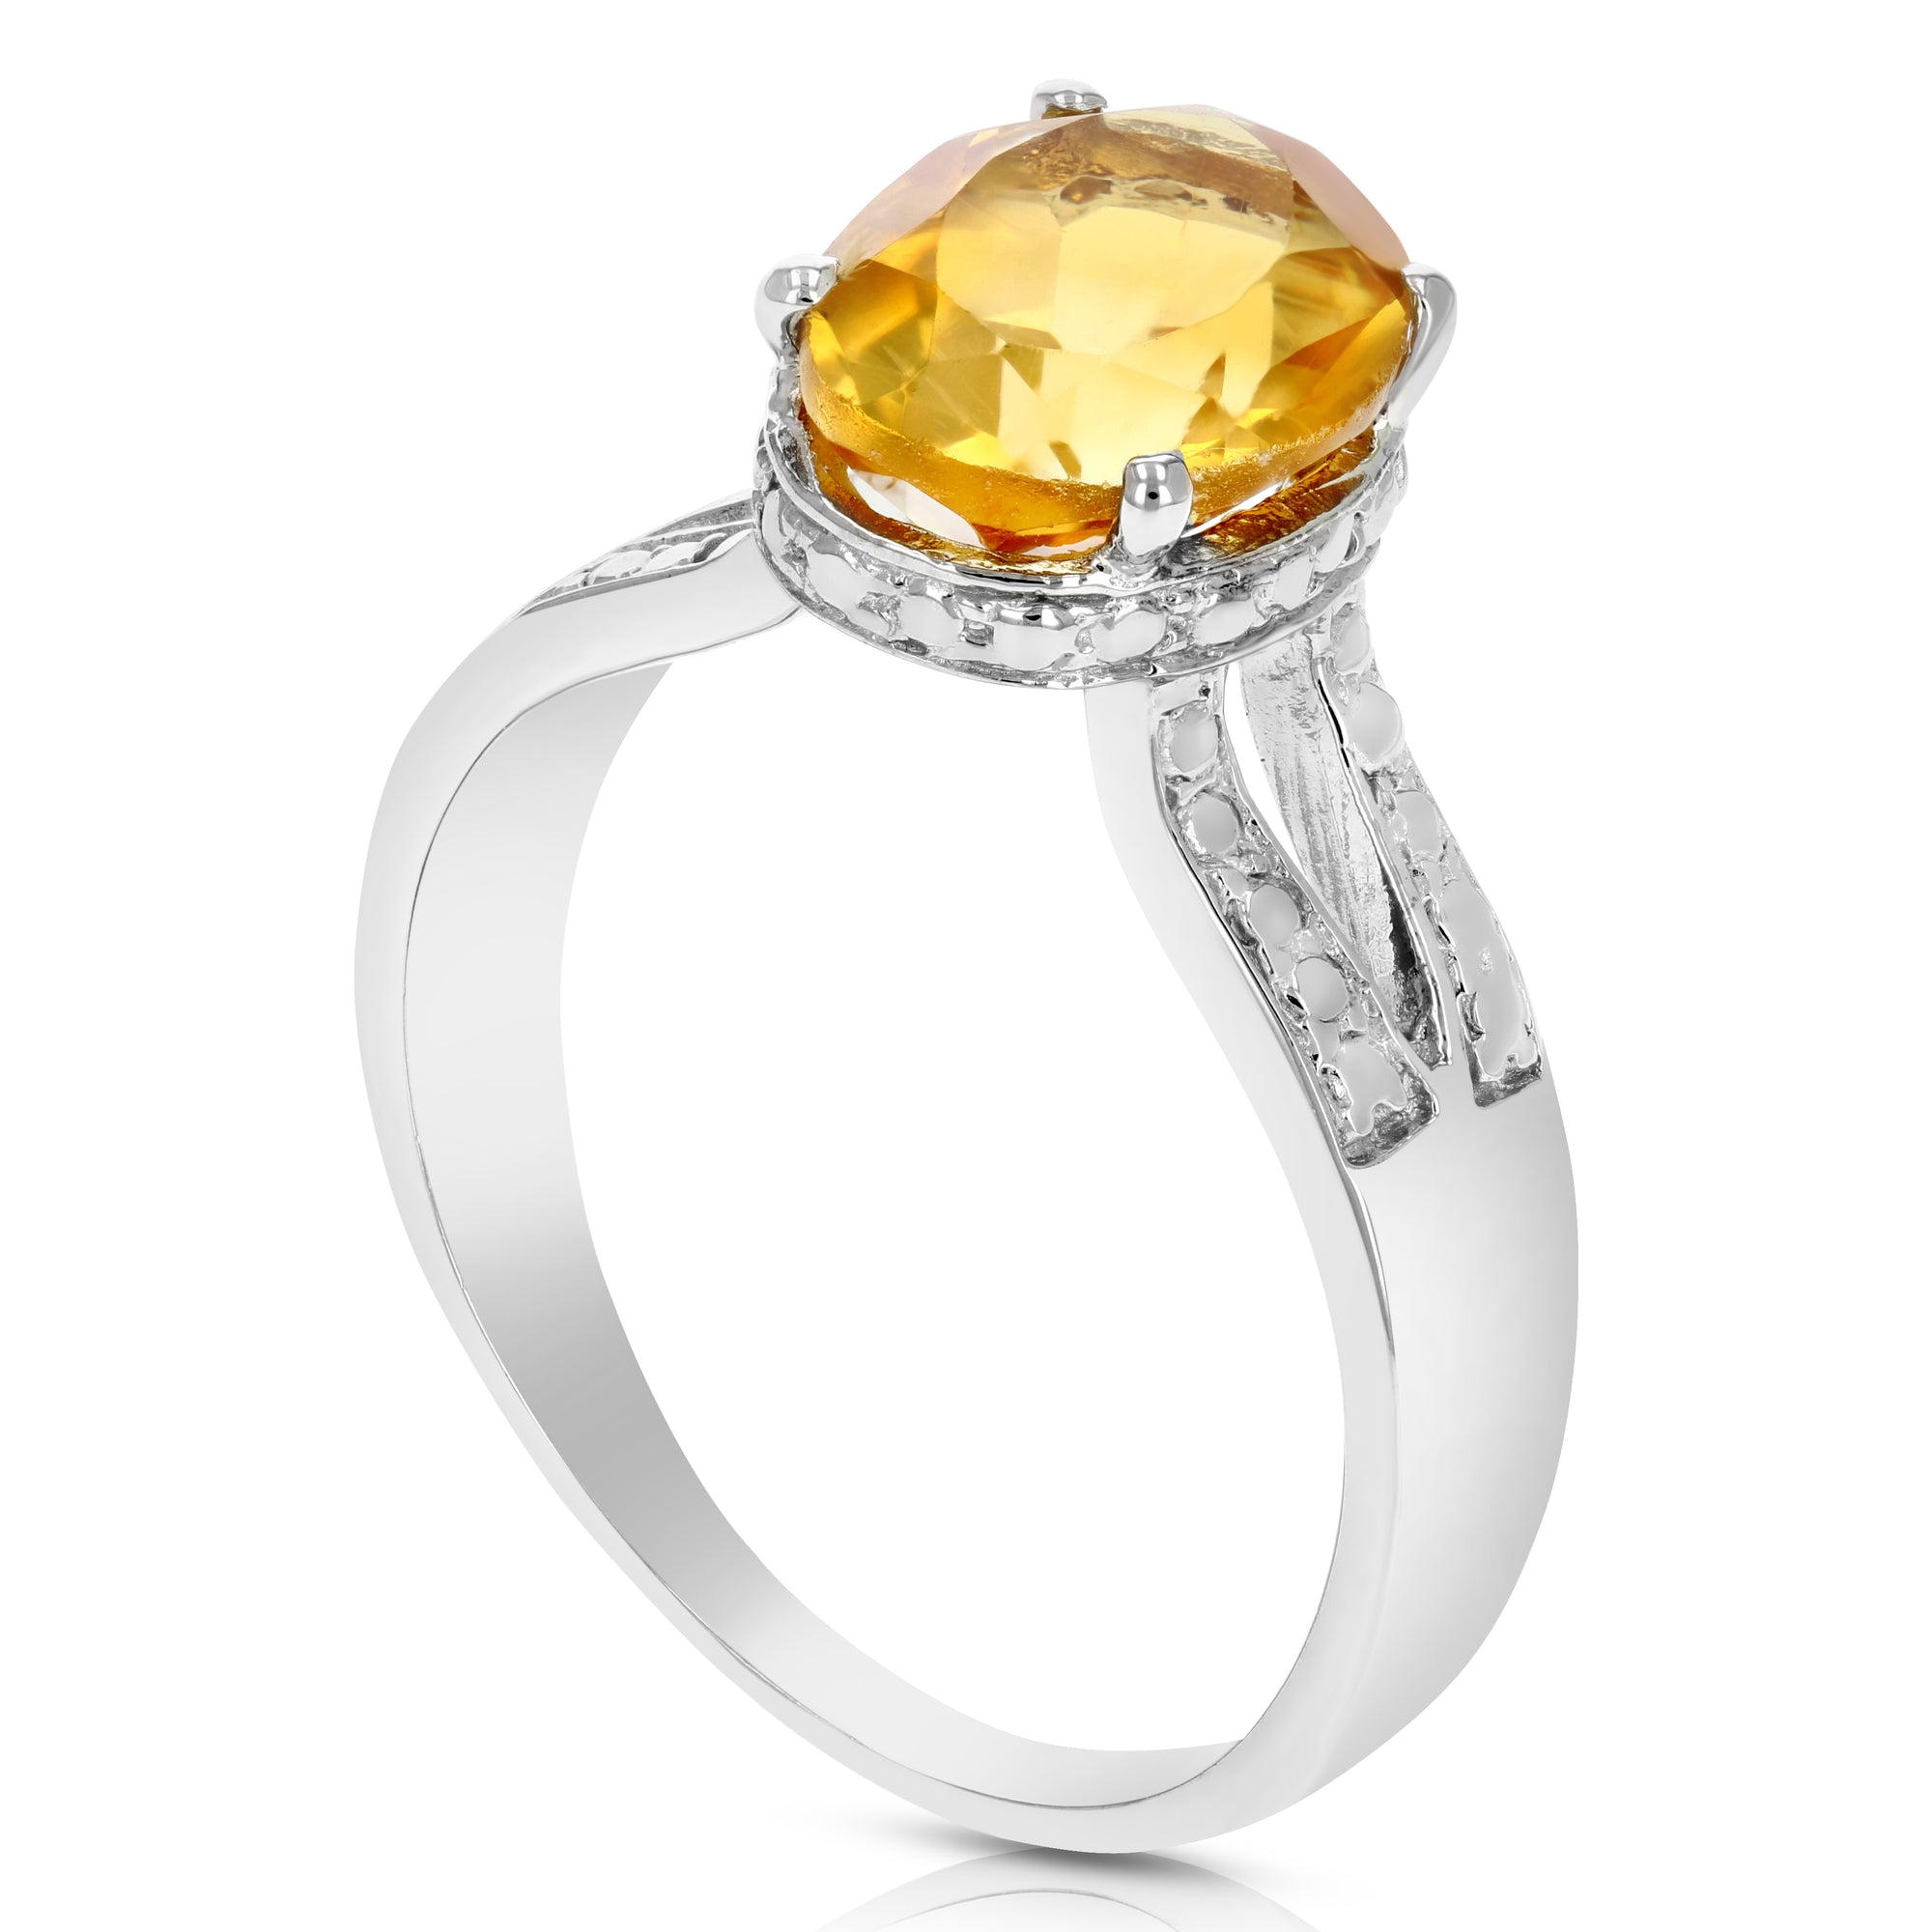 2 cttw Citrine Ring in .925 Sterling Silver with Rhodium Plating Oval Shape